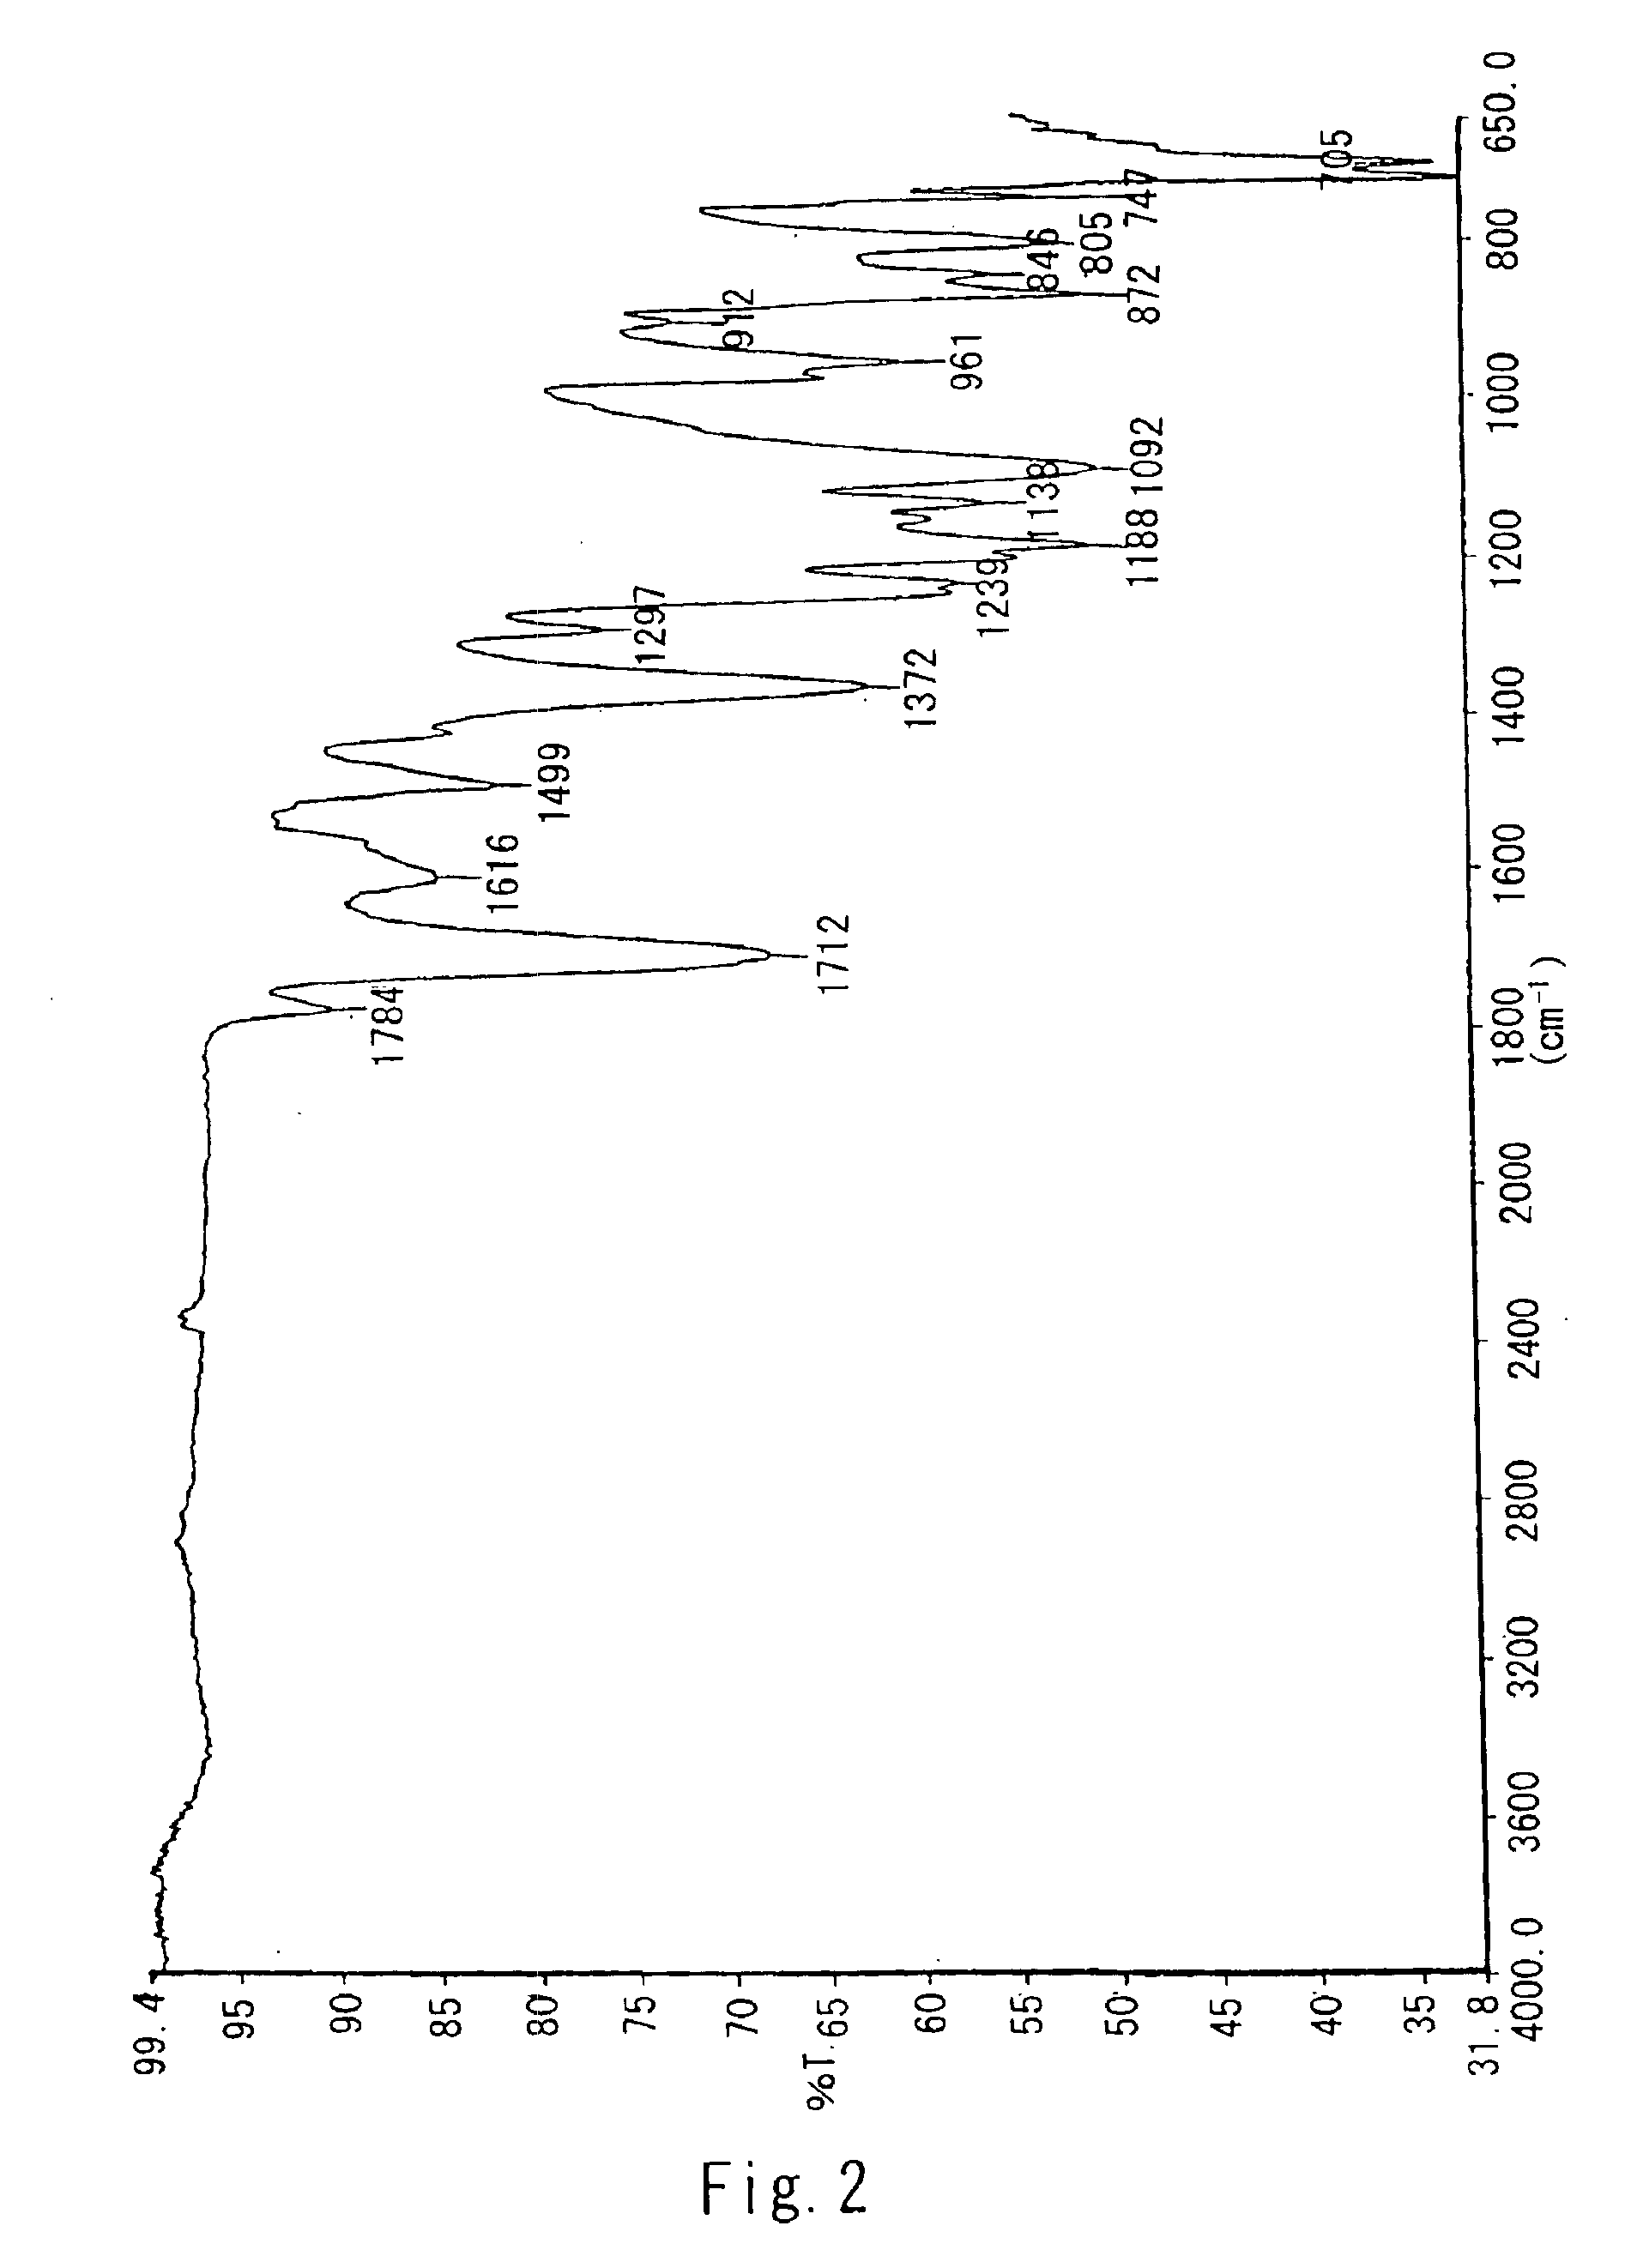 Imide-benzoxazole polycondensate and process for producing the same